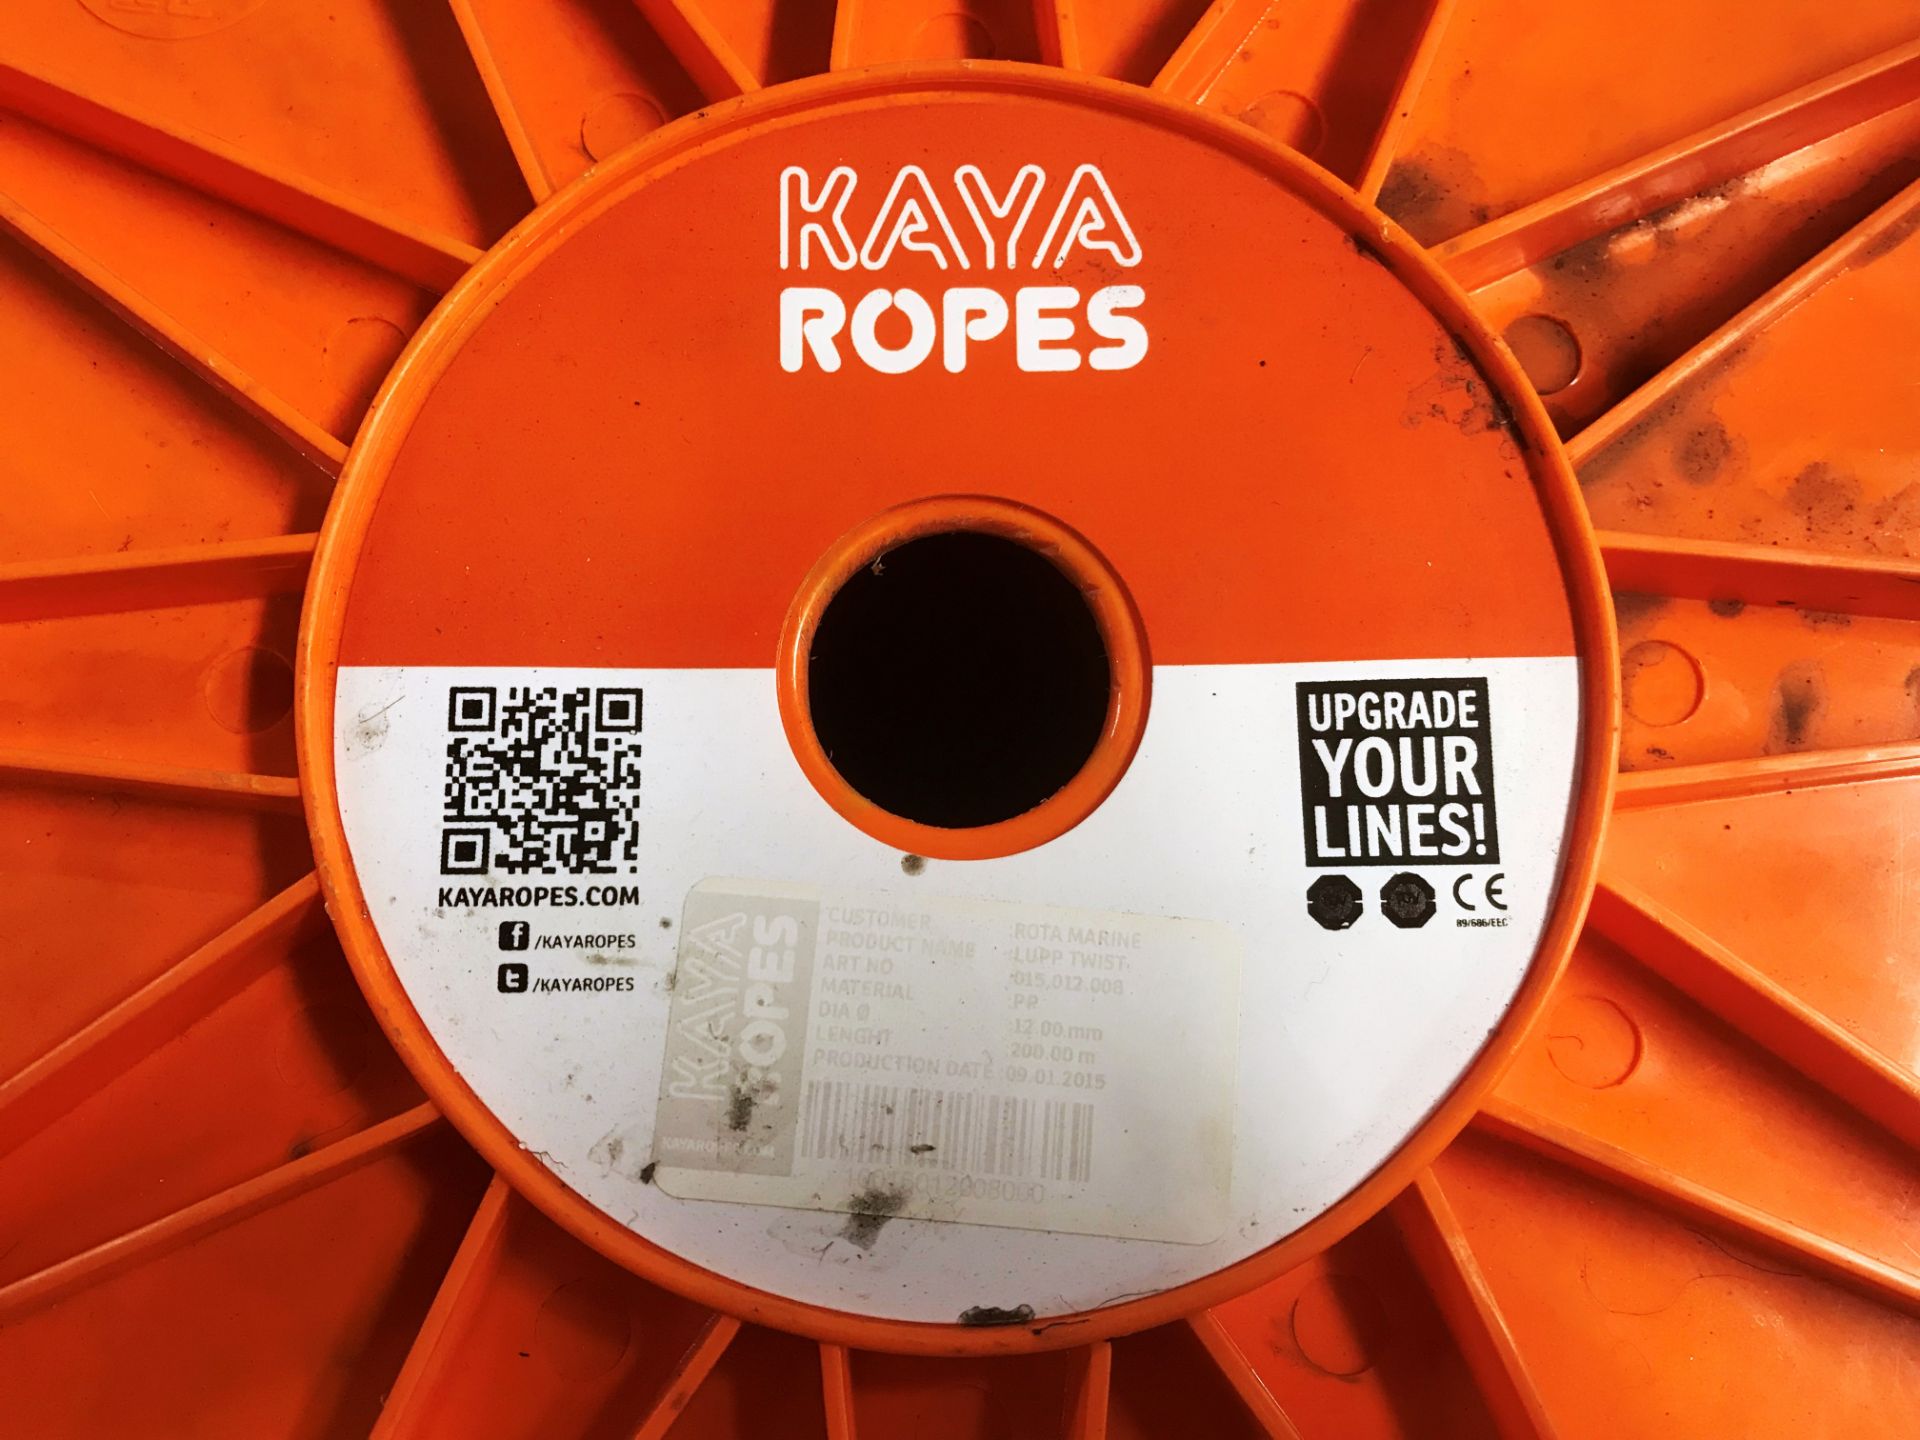 Part roll of Kaya Ropes lupp twist rope - 12mm Dia - Full length 200m - Image 2 of 3